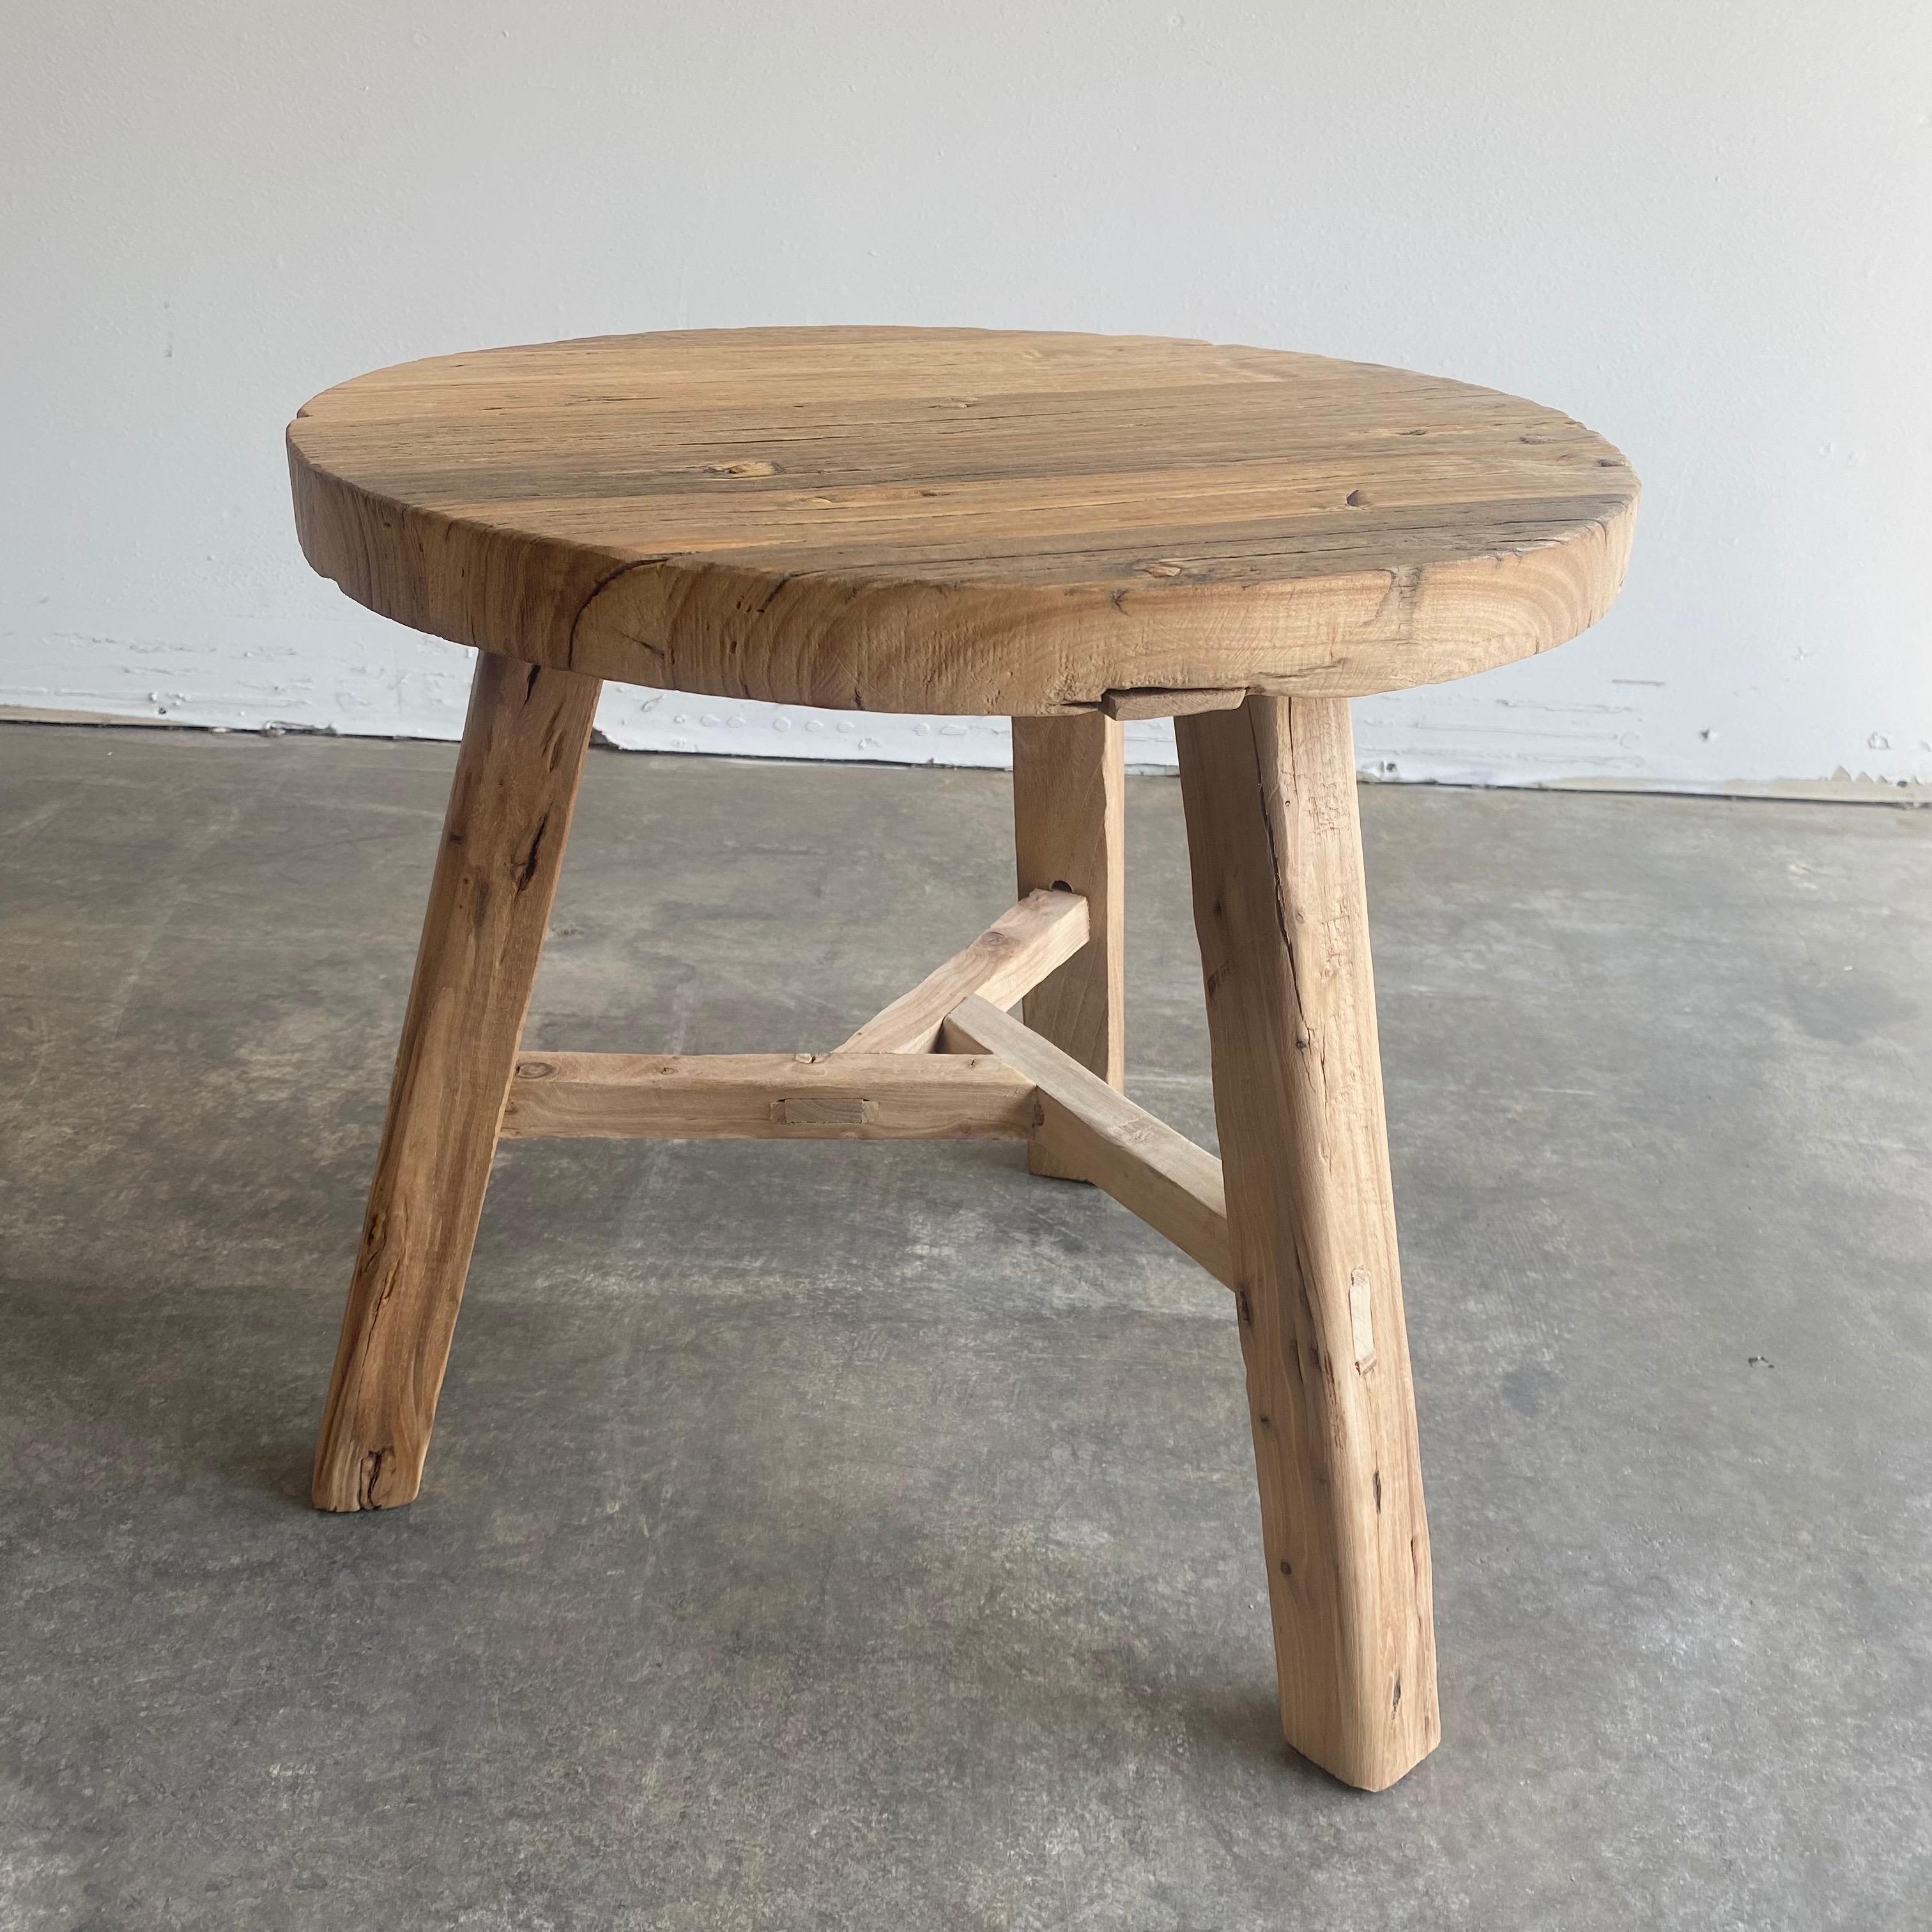 Round natural side table made from reclaimed elmwood Raw natural finish, a warm honey with gray tones in the wood. Solid and sturdy, a great side table for next to a bed, sofa, chairs. Can be stained or painted for a customized look
 Size: 20